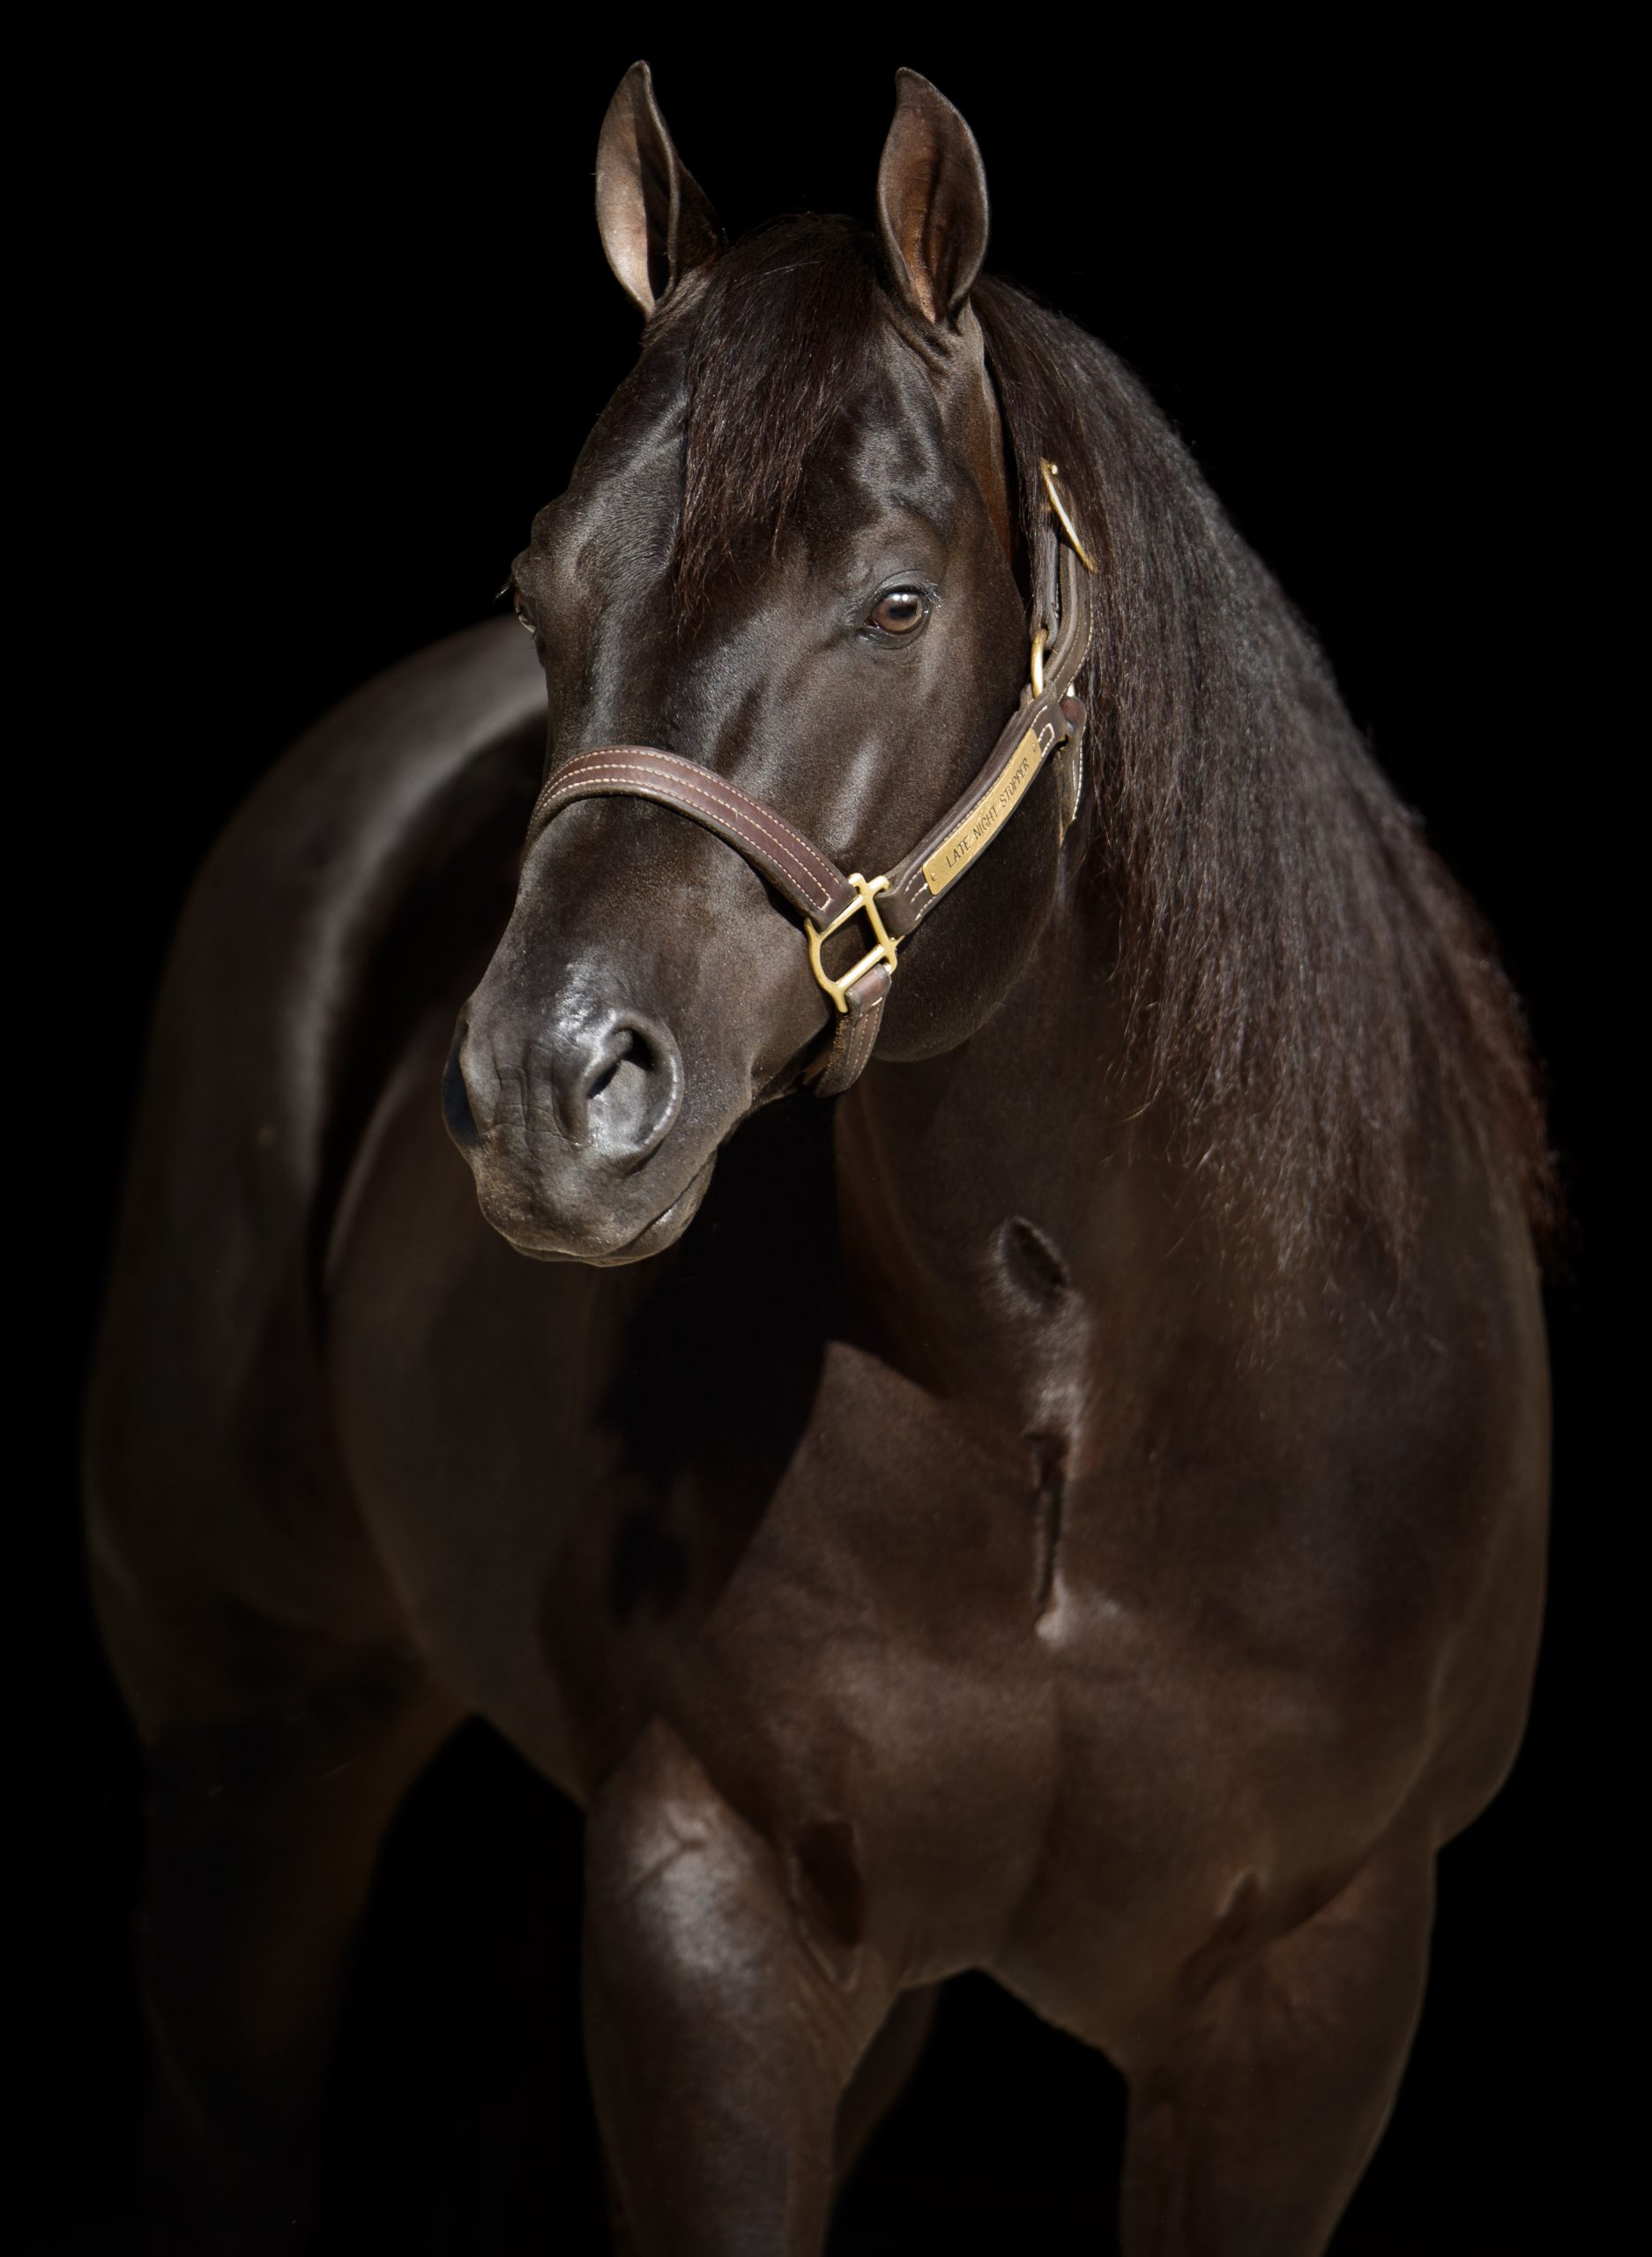 Late-Night-Stopper-Head-L-Blk-Oswood-Stallions-9-18-2109897-Edit-scaled